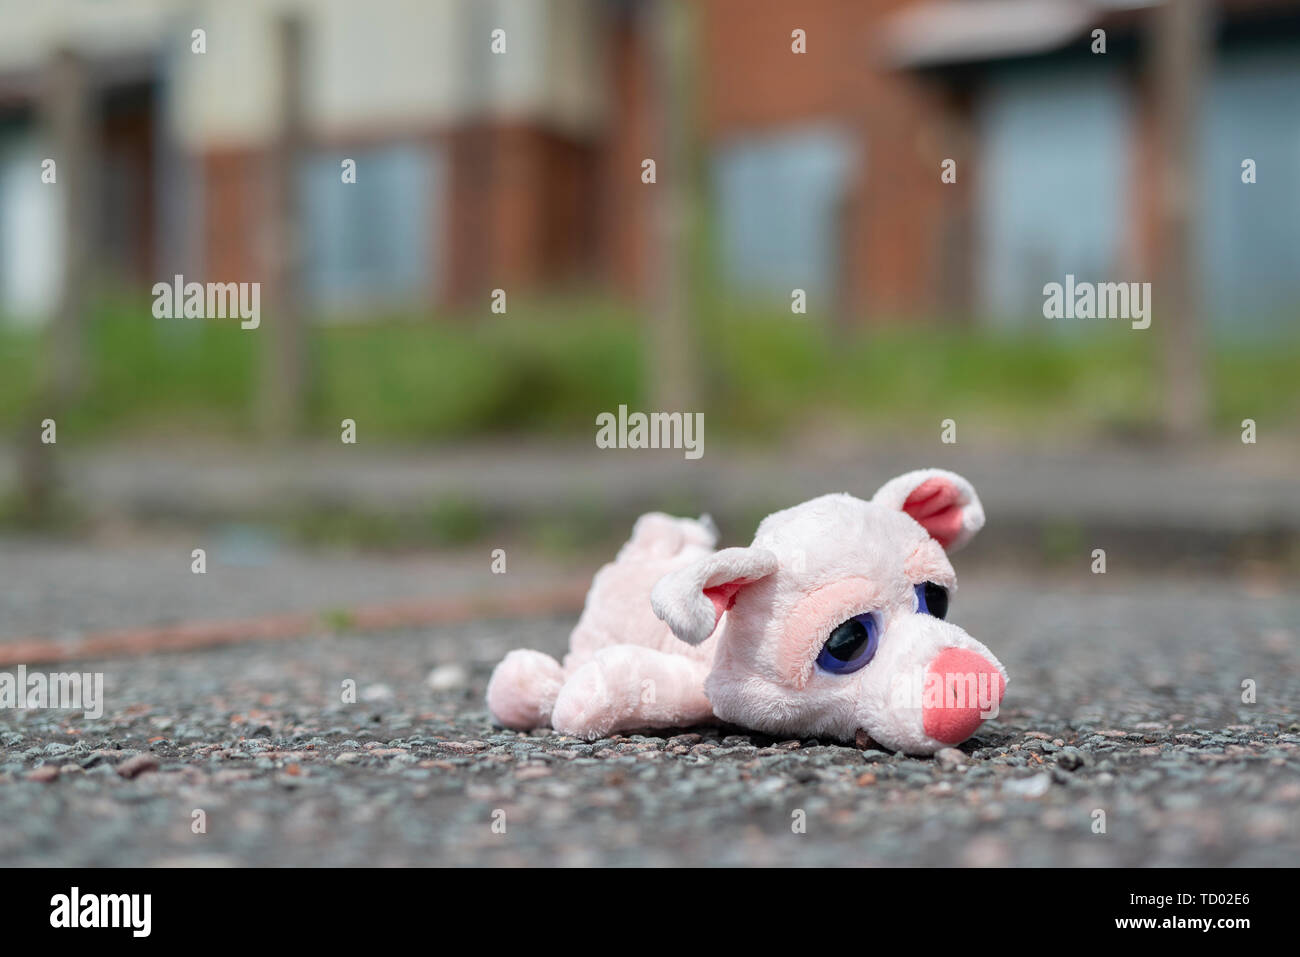 A child's toy lies on the ground outside some boarded up abandoned houses on the High Street estate in Pendleton, Salford, Greater Manchester, UK. Stock Photo